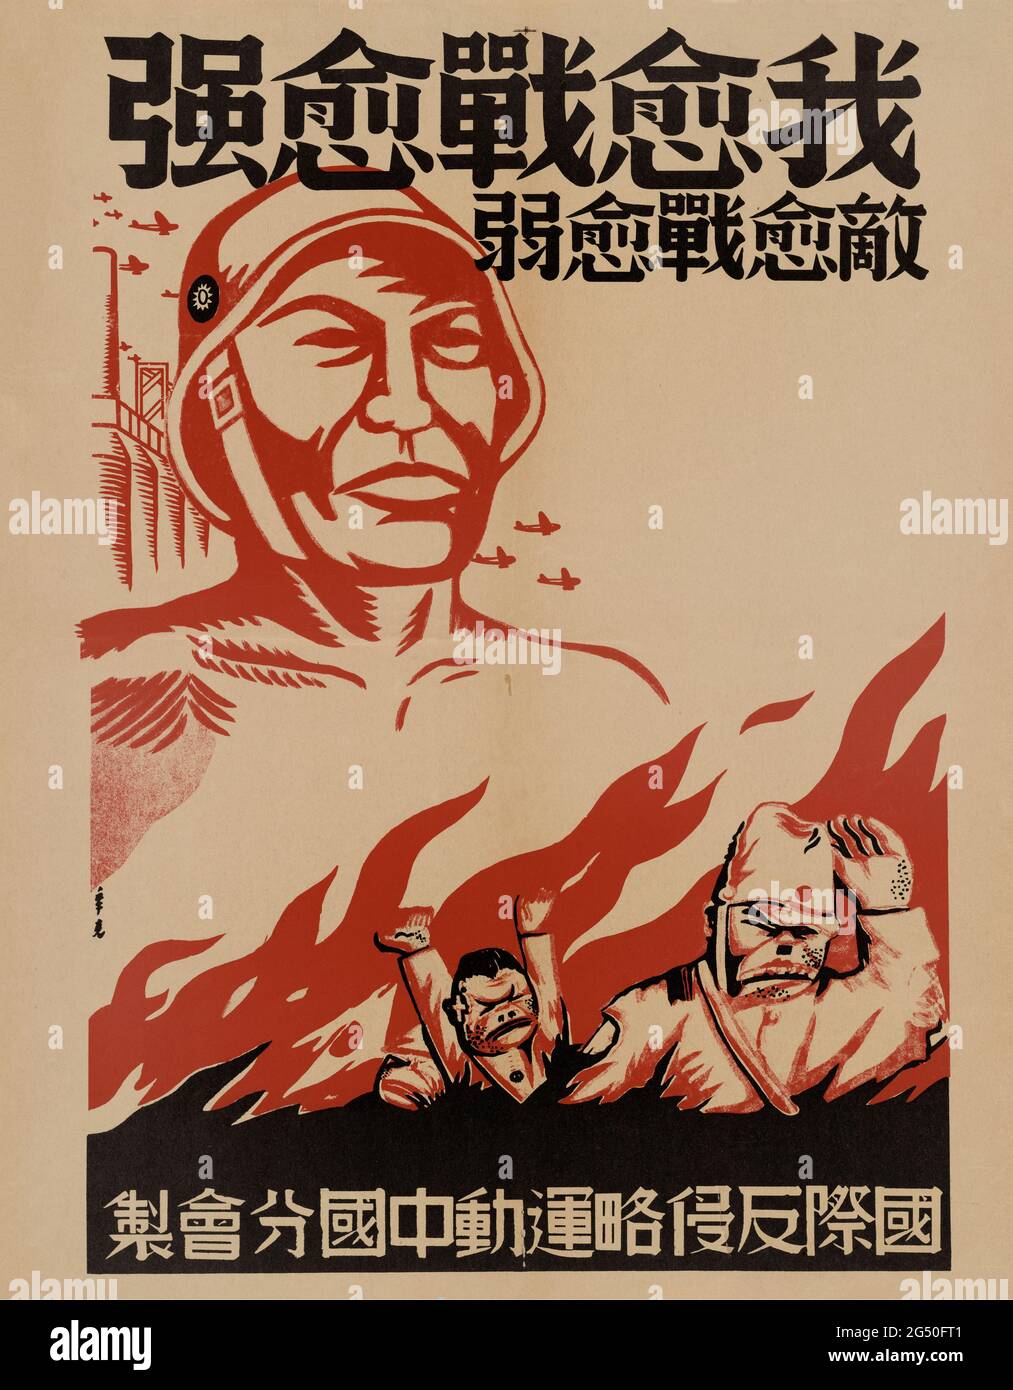 Vintage Chinese Kuomintang anti-Japanese propaganda poster.  Second Sino-Japanese War period. 1937-1945 The Kuomintang (KMT) (Chinese Nationalist Part Stock Photo